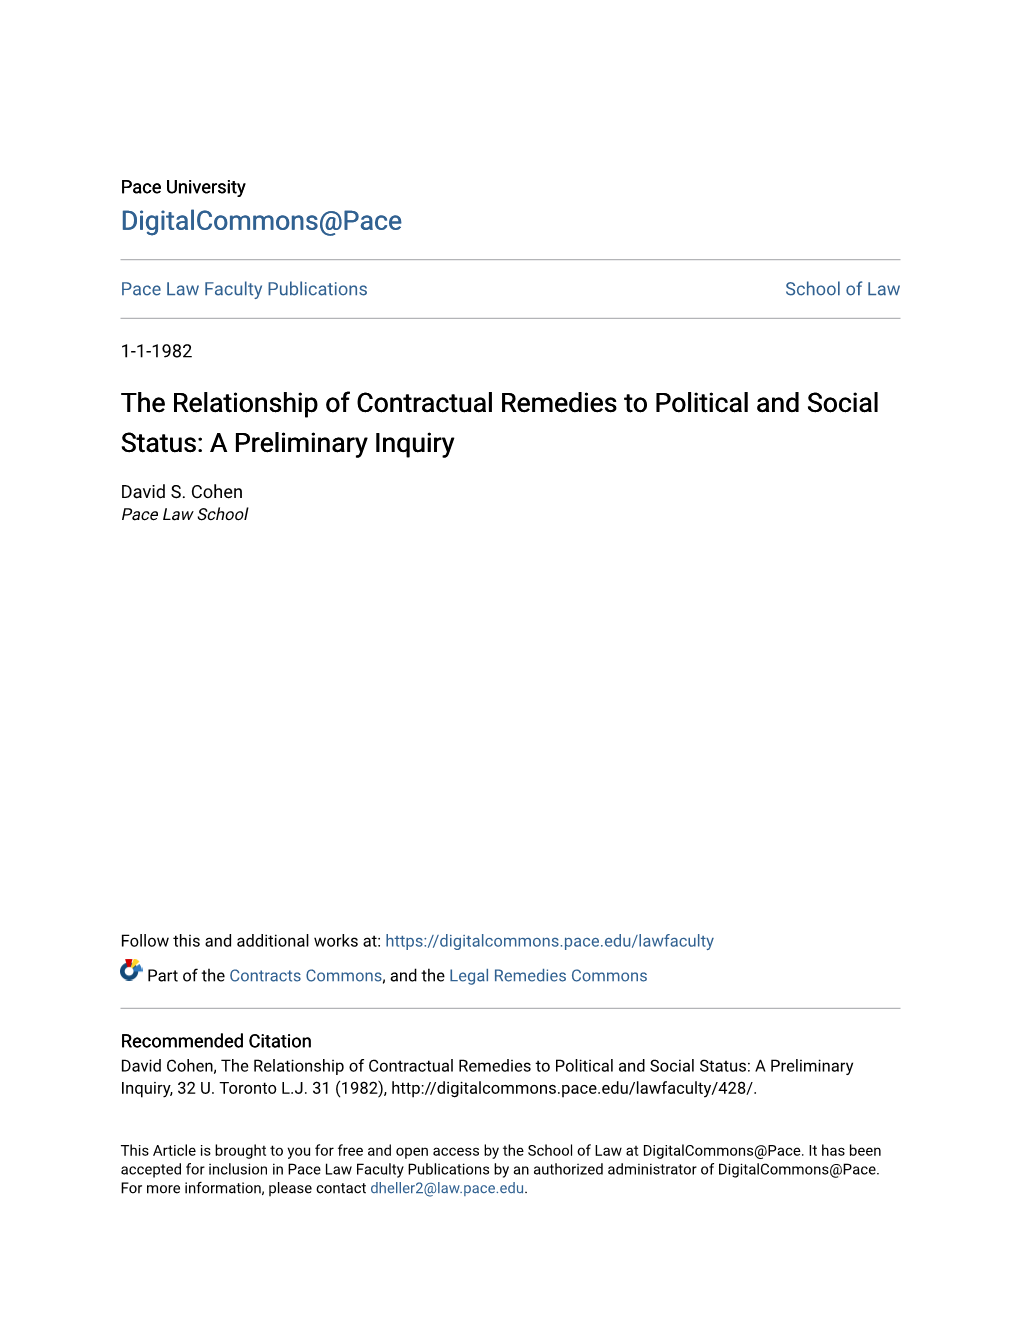 The Relationship of Contractual Remedies to Political and Social Status: a Preliminary Inquiry